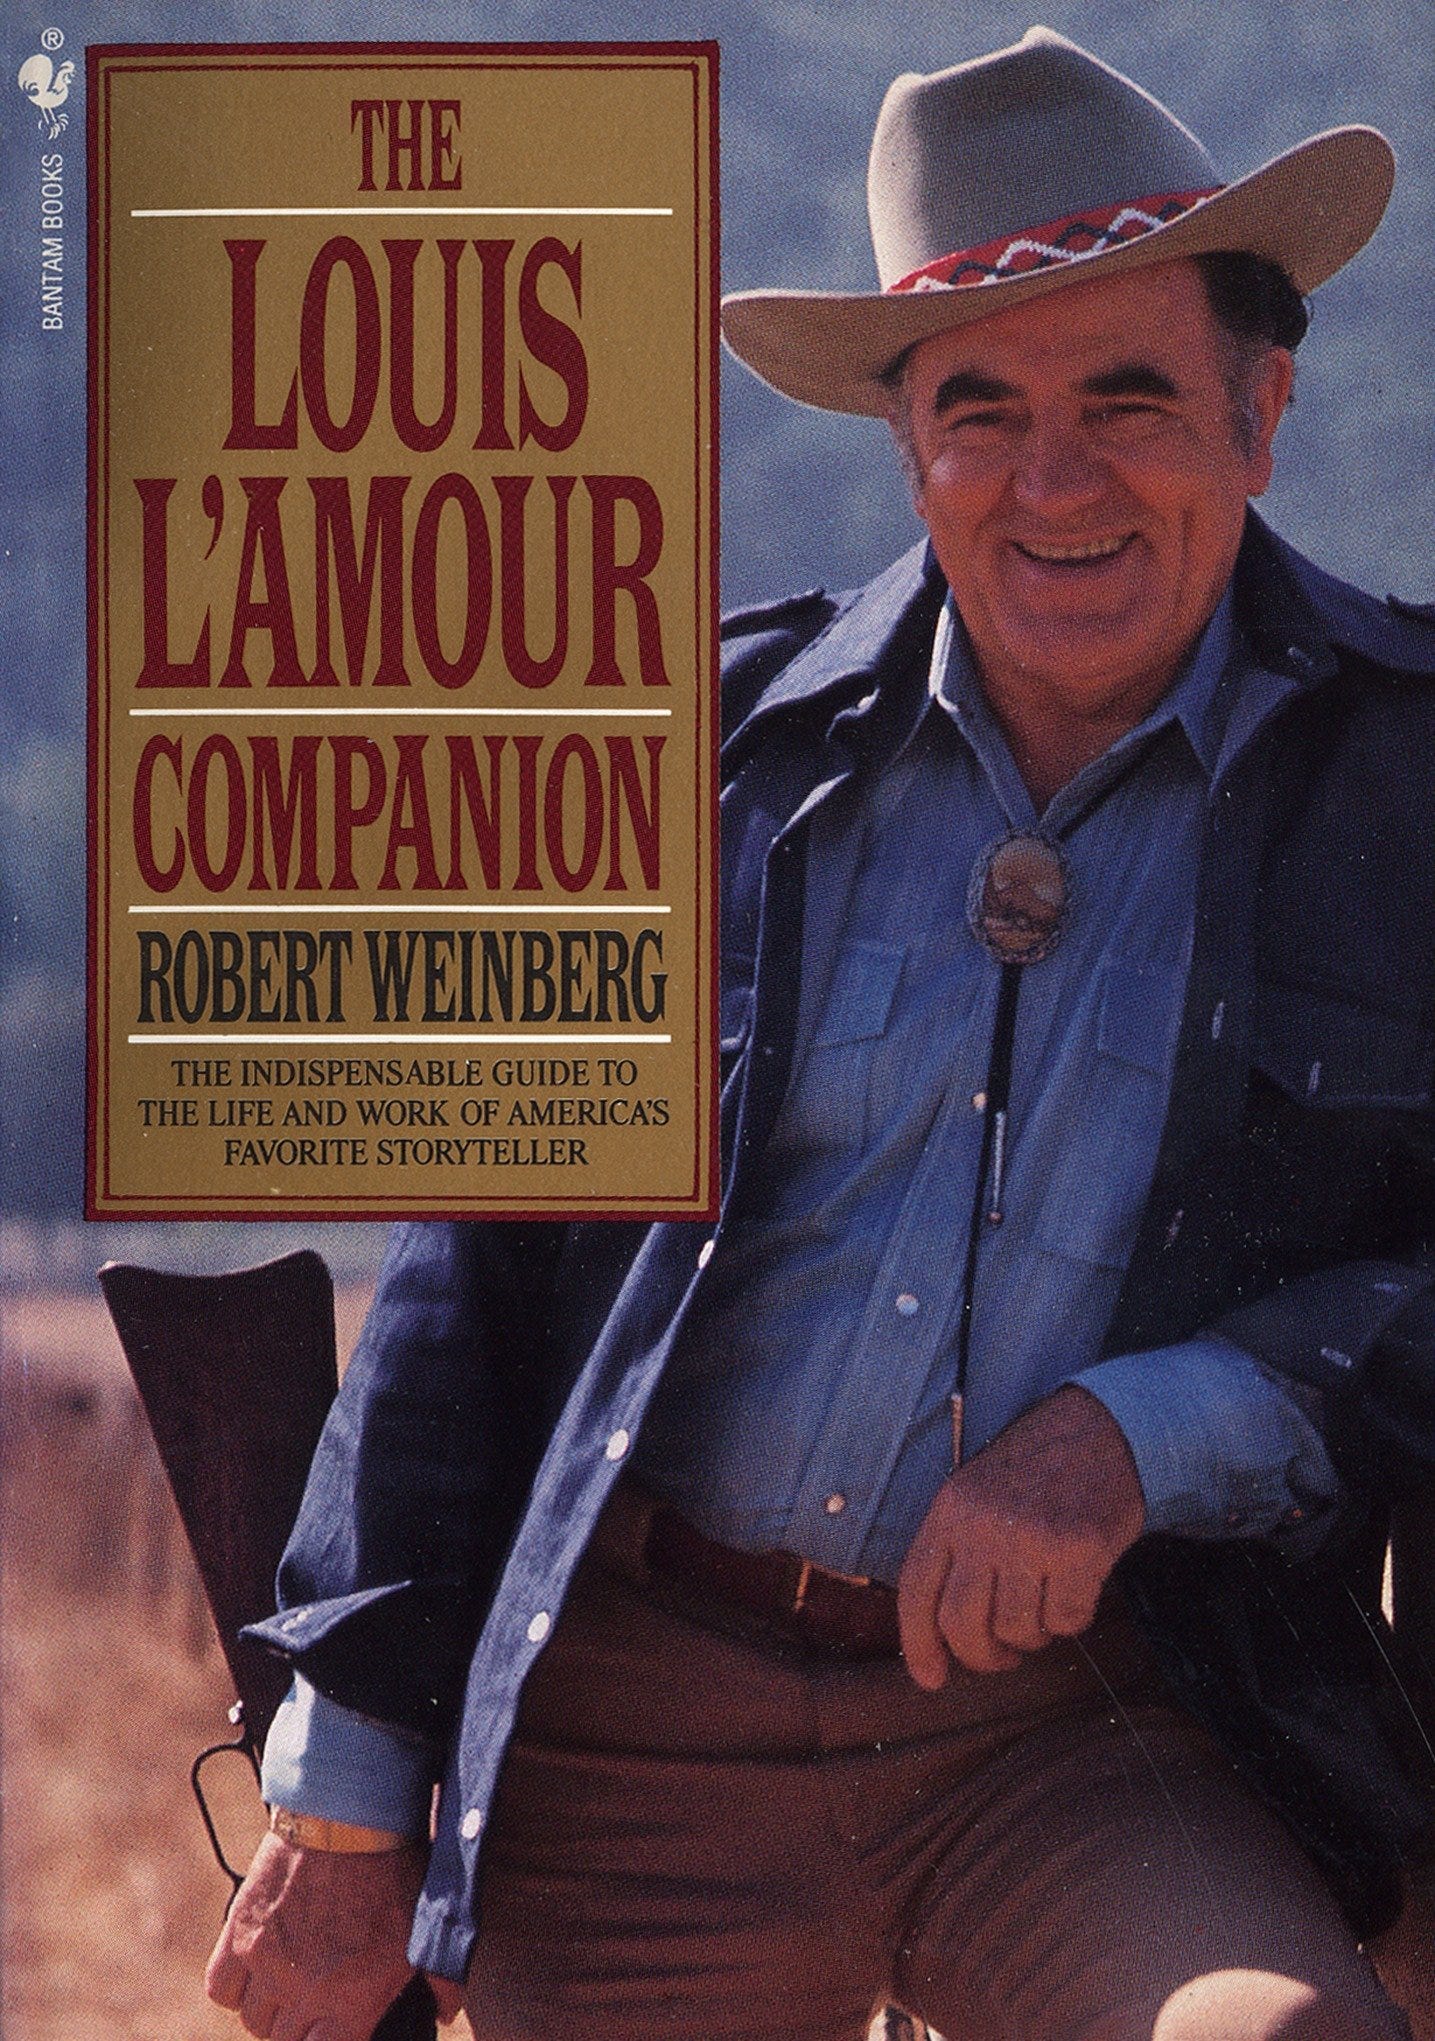 The Louis L'Amour Companion: Weinberg, Robert: 9780553566093: Books